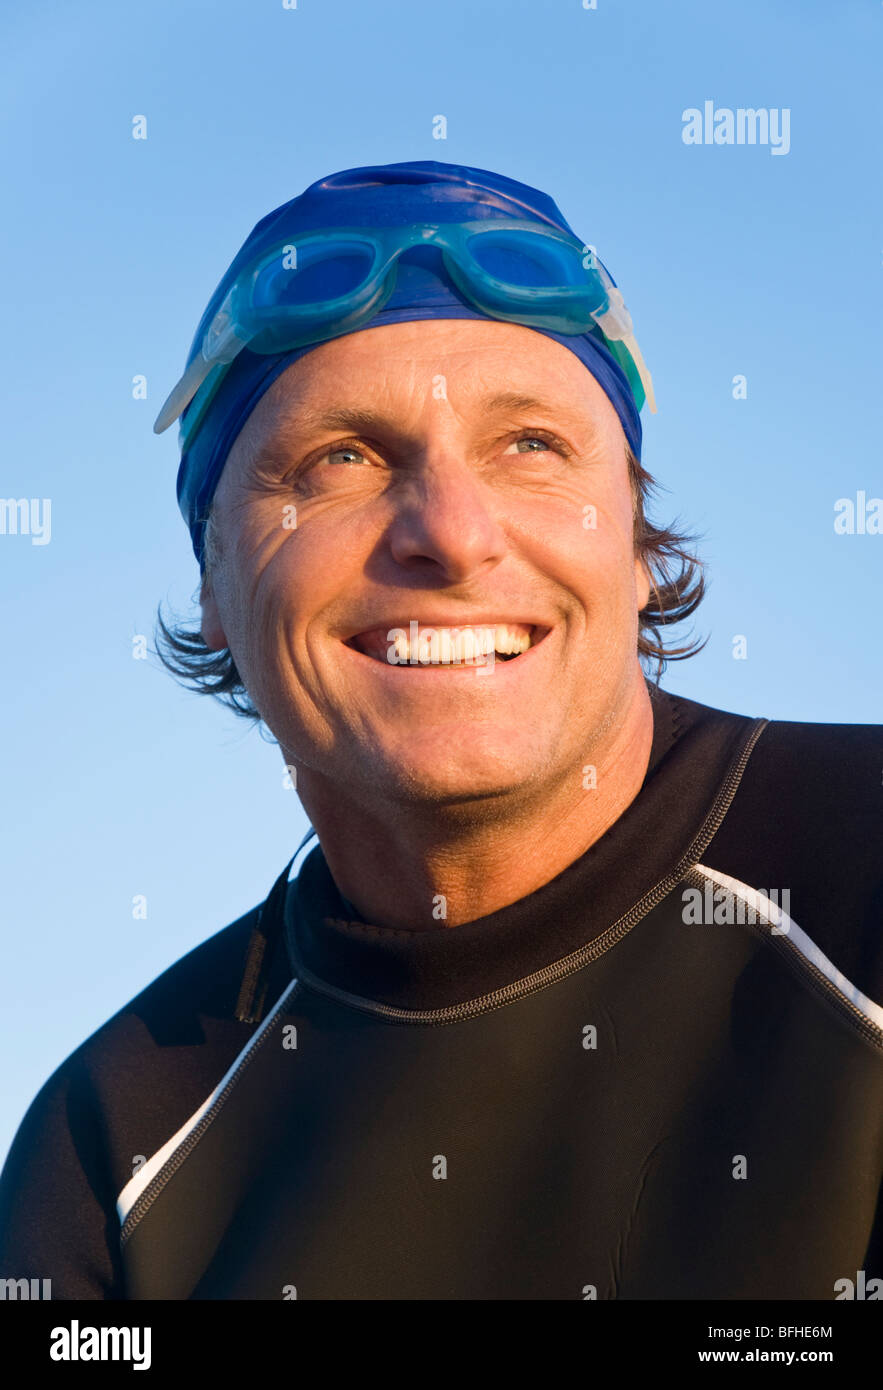 A colour portrait of a happy laughing swimmer or triathlete. Stock Photo